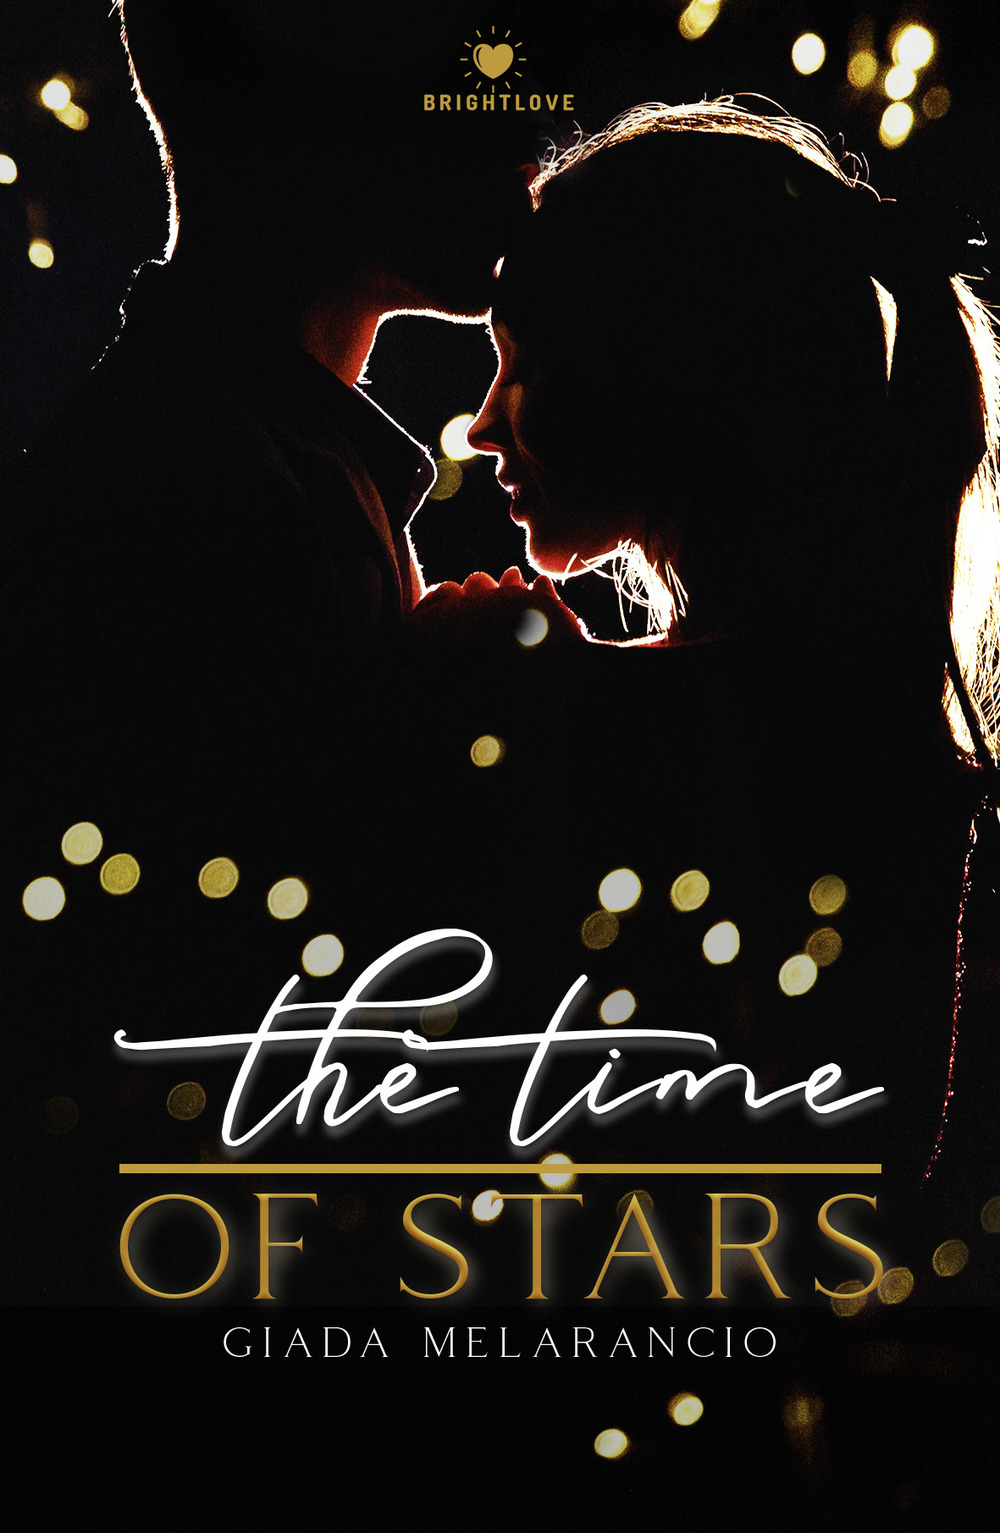 The time of stars